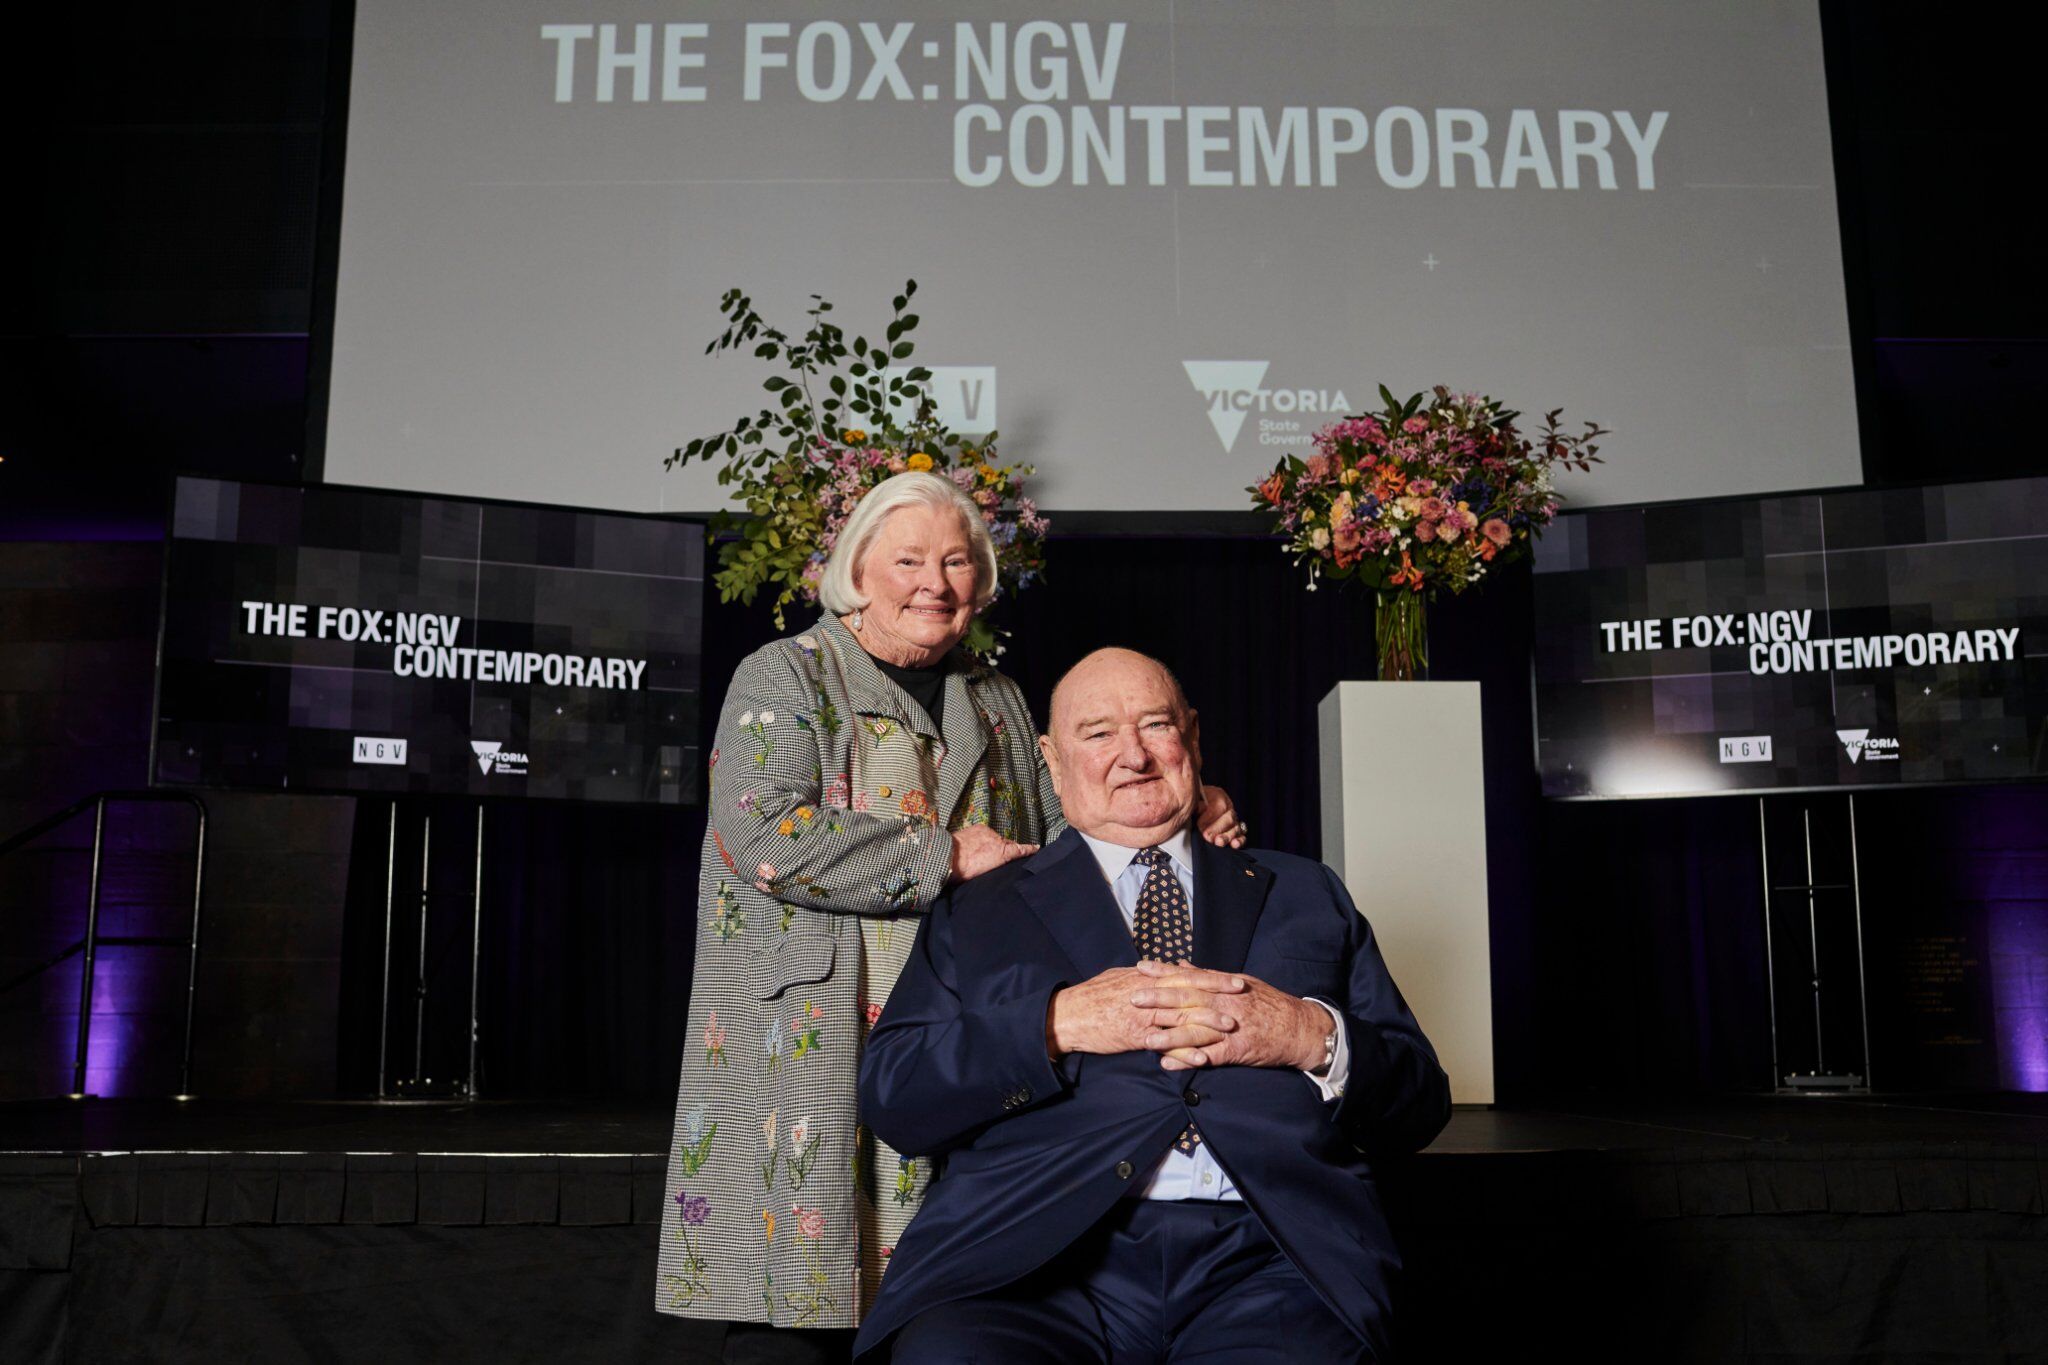 A seated man in a dark grey suit and a woman standing with her hands on the mans shoulder, she is wearing a grey jacket with a floral design. They stand in a dark auditorium with the words The Fox: NGV Contemporary on three screens in the background.